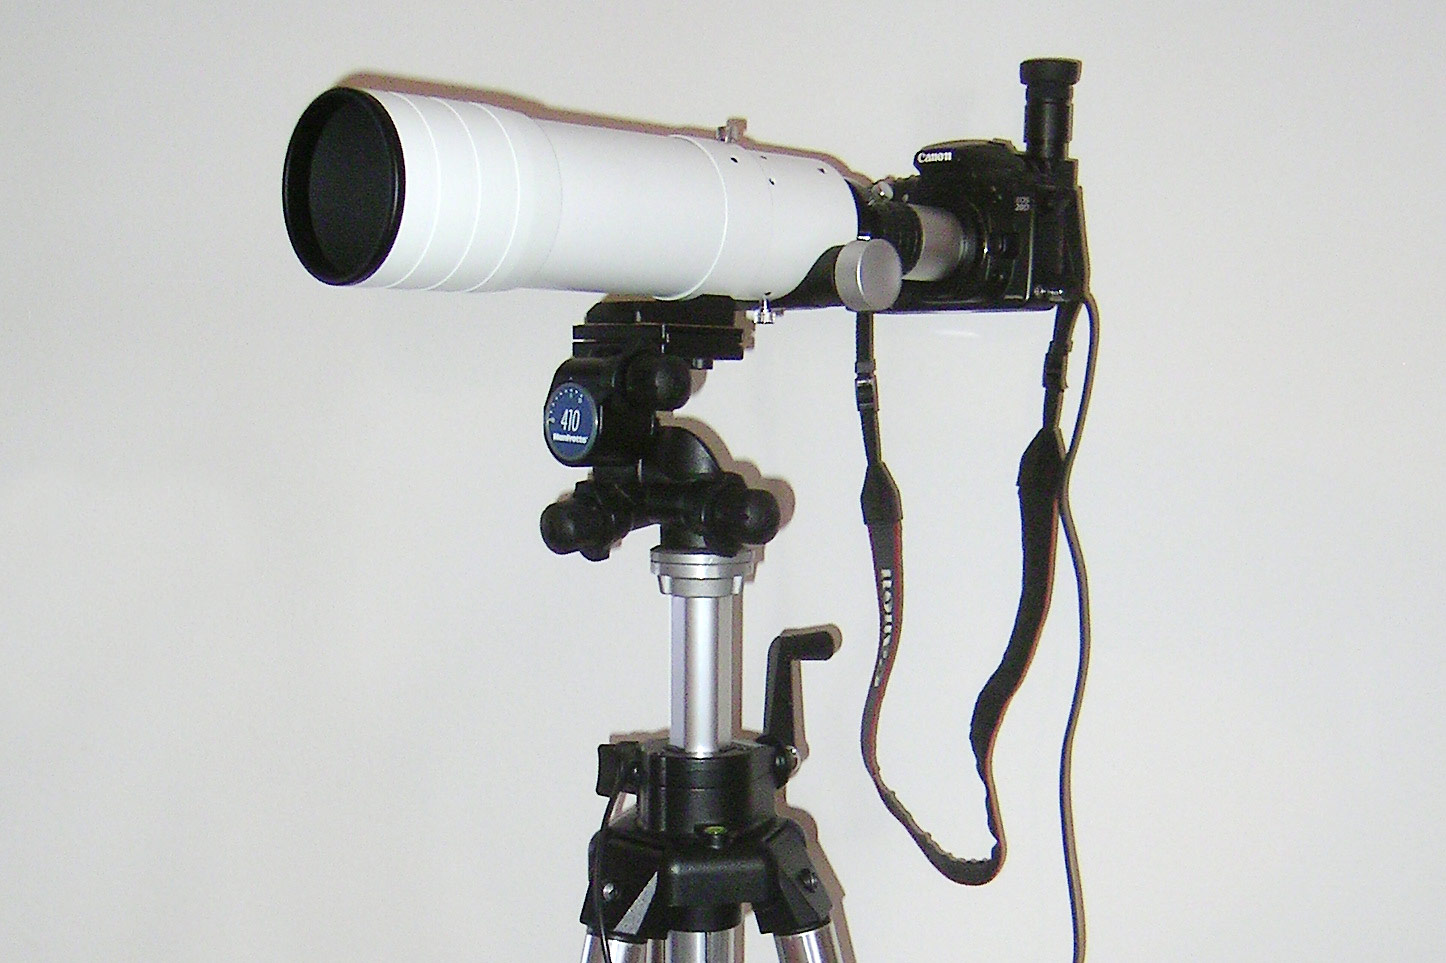 The WO Megrez72 mounted on the Manfrotto 410 gear tilt head